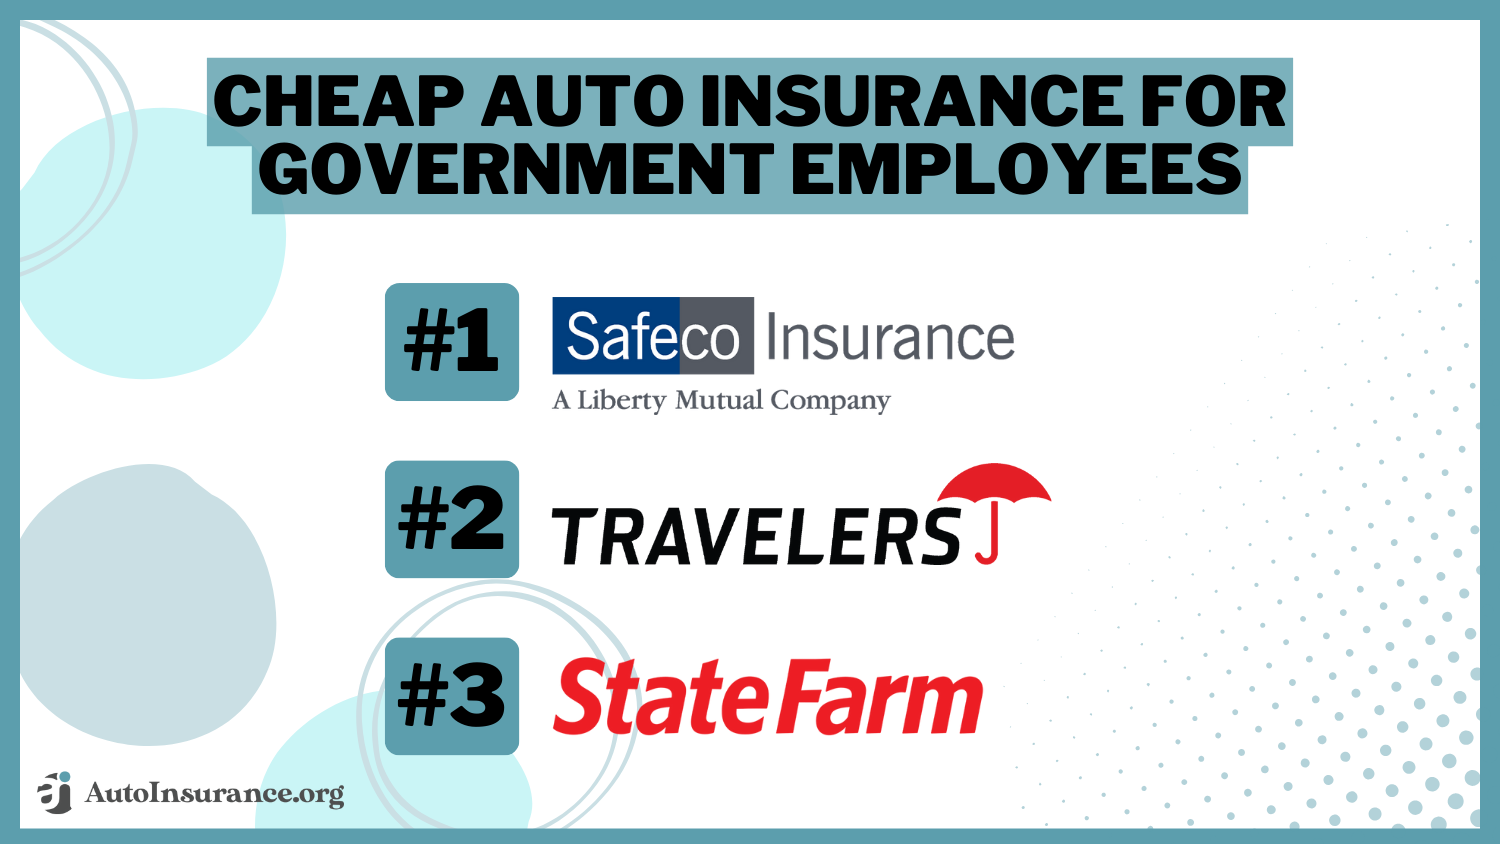 Cheap Auto Insurance for Government Employees